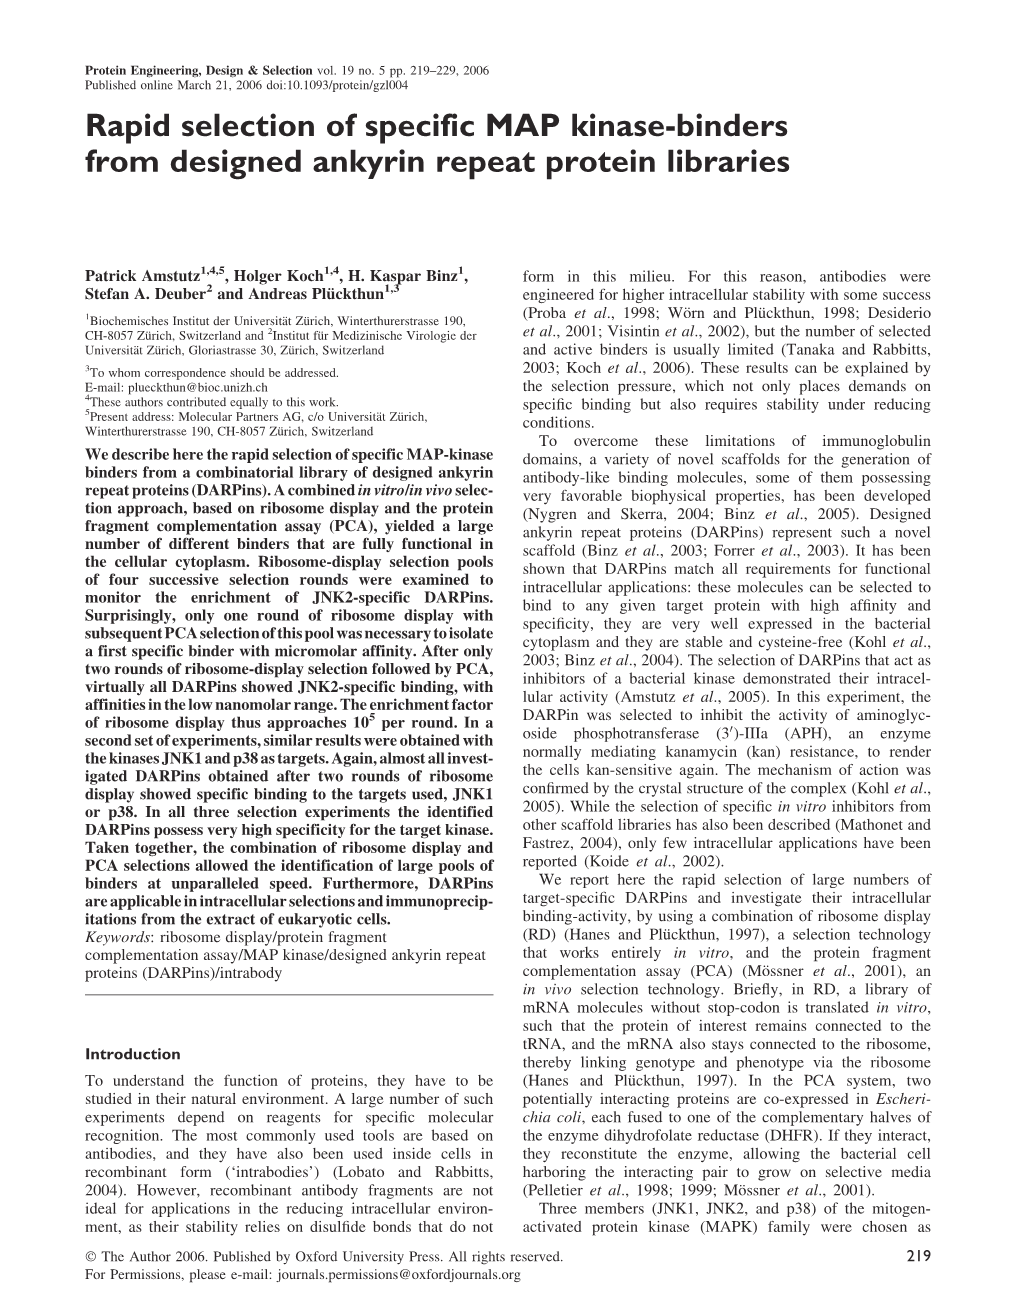 Rapid Selection of Specific MAP Kinase-Binders from Designed Ankyrin Repeat Protein Libraries